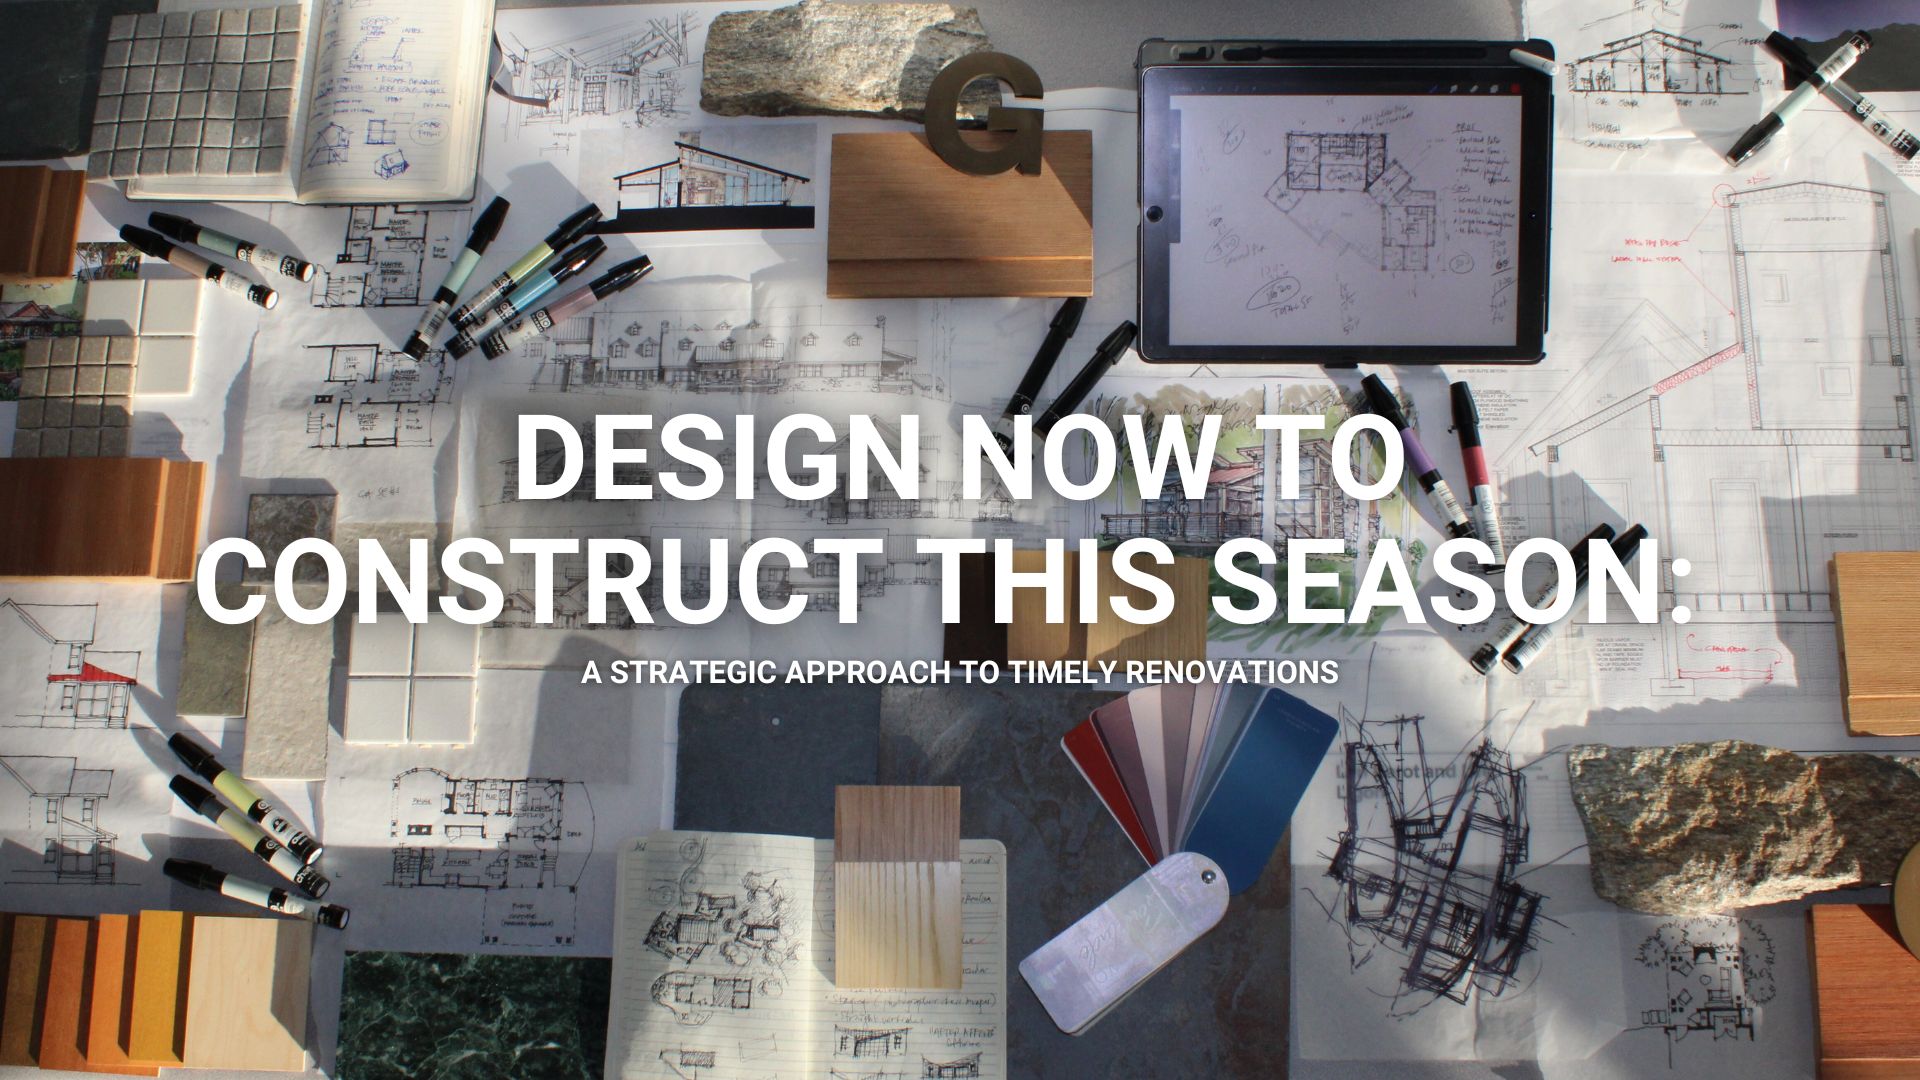 Design Now to Construct This Season: A Strategic Approach to Timely Renovations